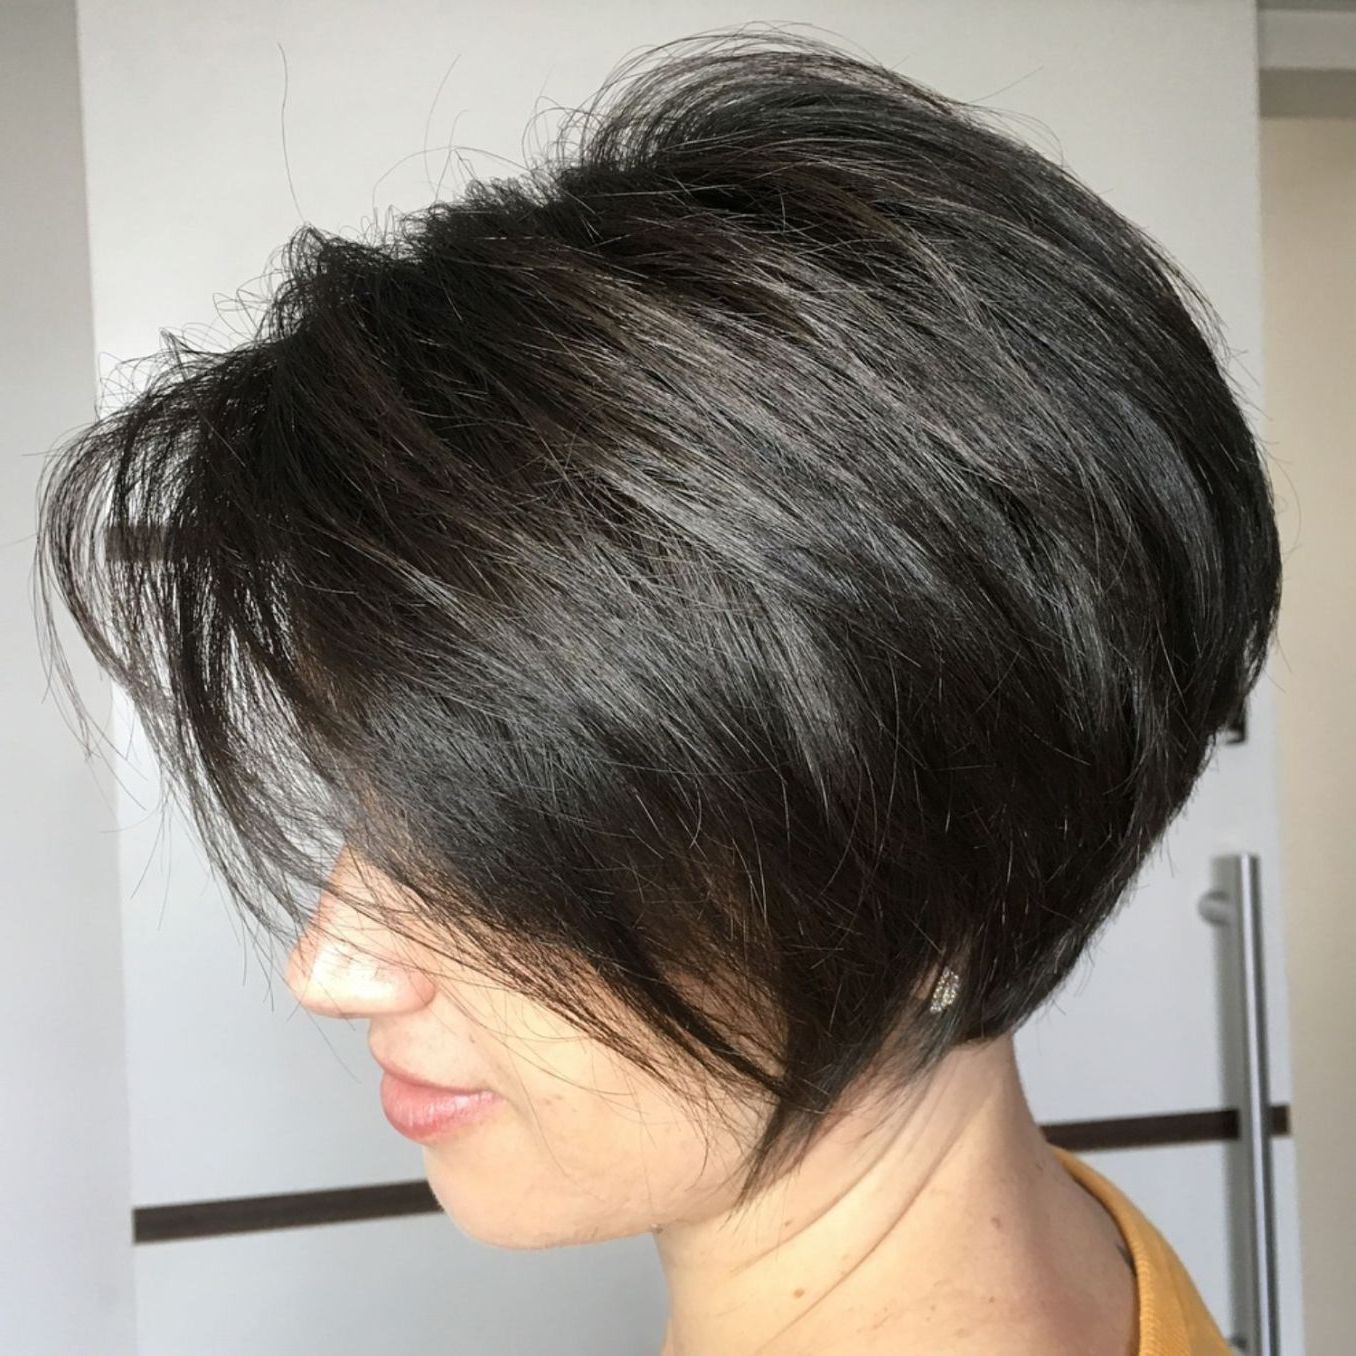 60 Classy Short Haircuts And Hairstyles For Thick Hair In 2018 Inside Long Feathered Espresso Brown Pixie Hairstyles (Gallery 4 of 20)